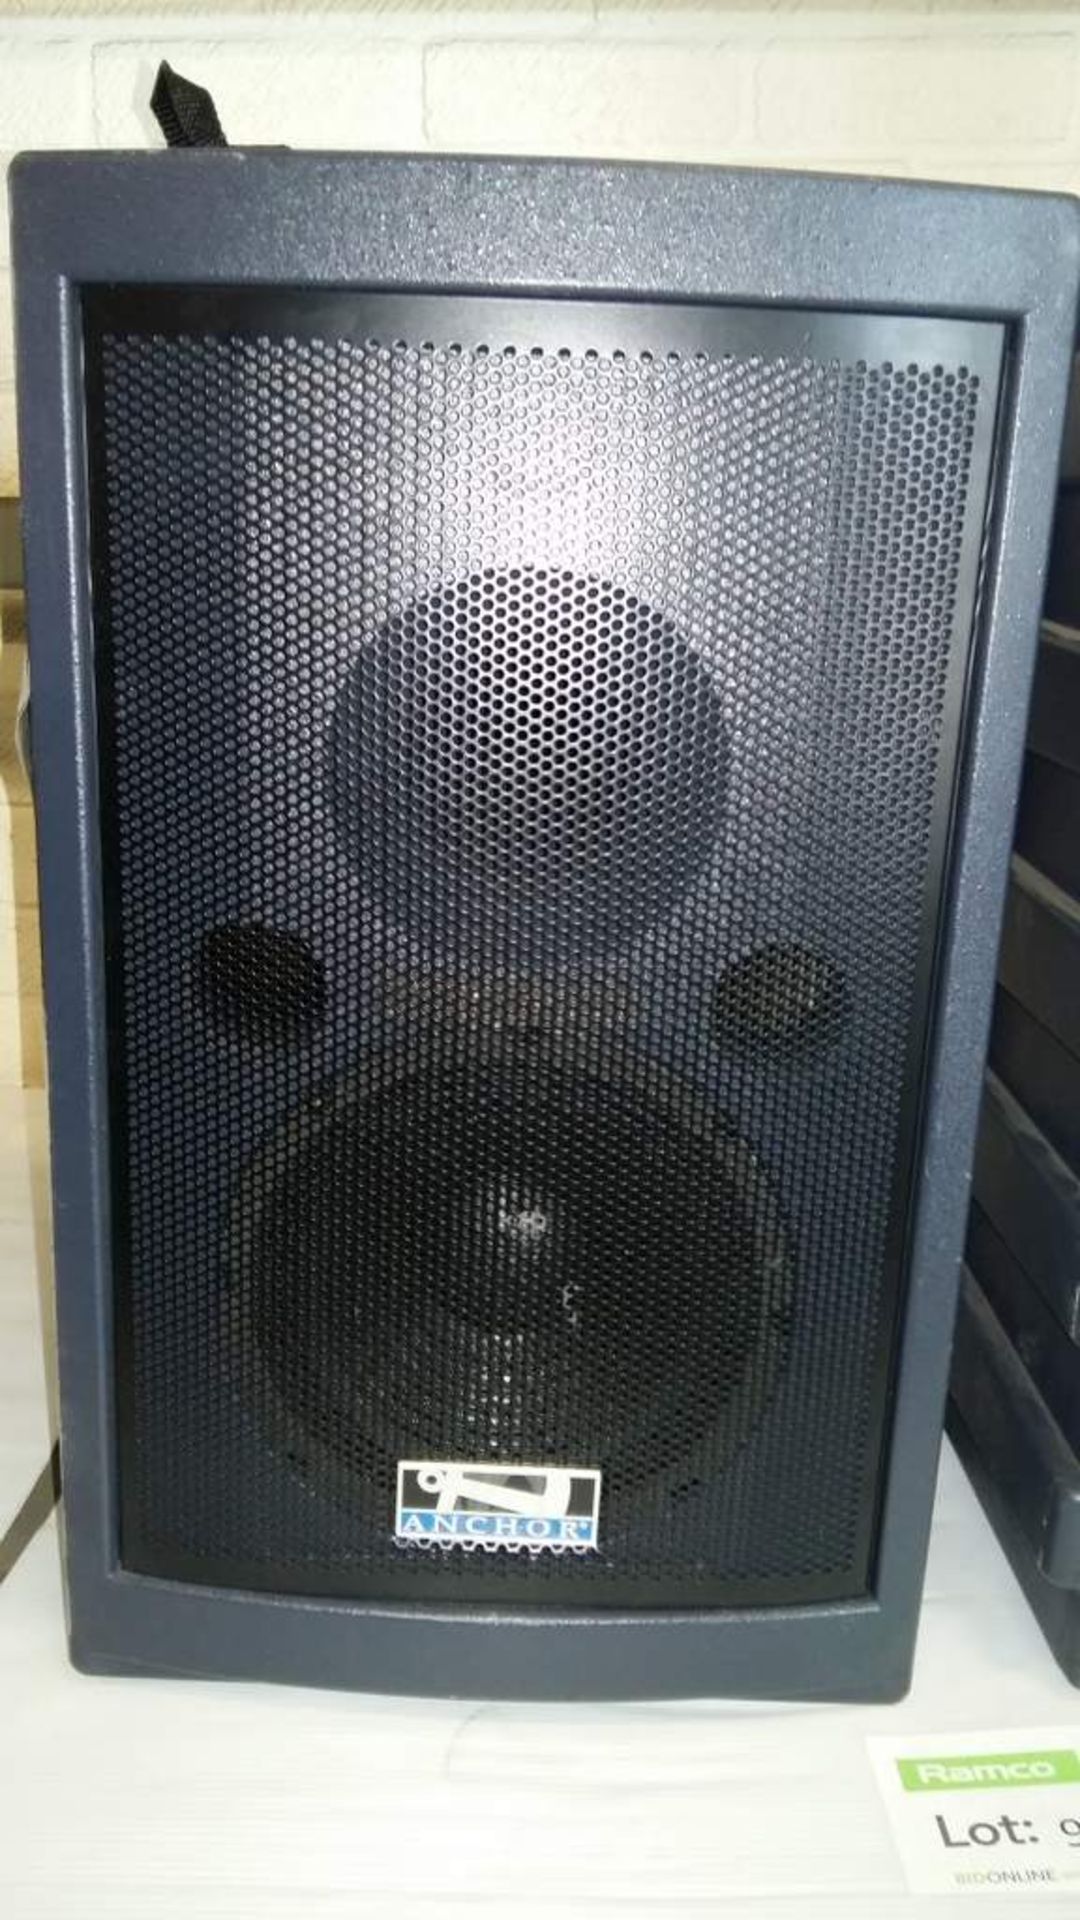 2x Anchor liberty 6000 speakers - Image 2 of 3